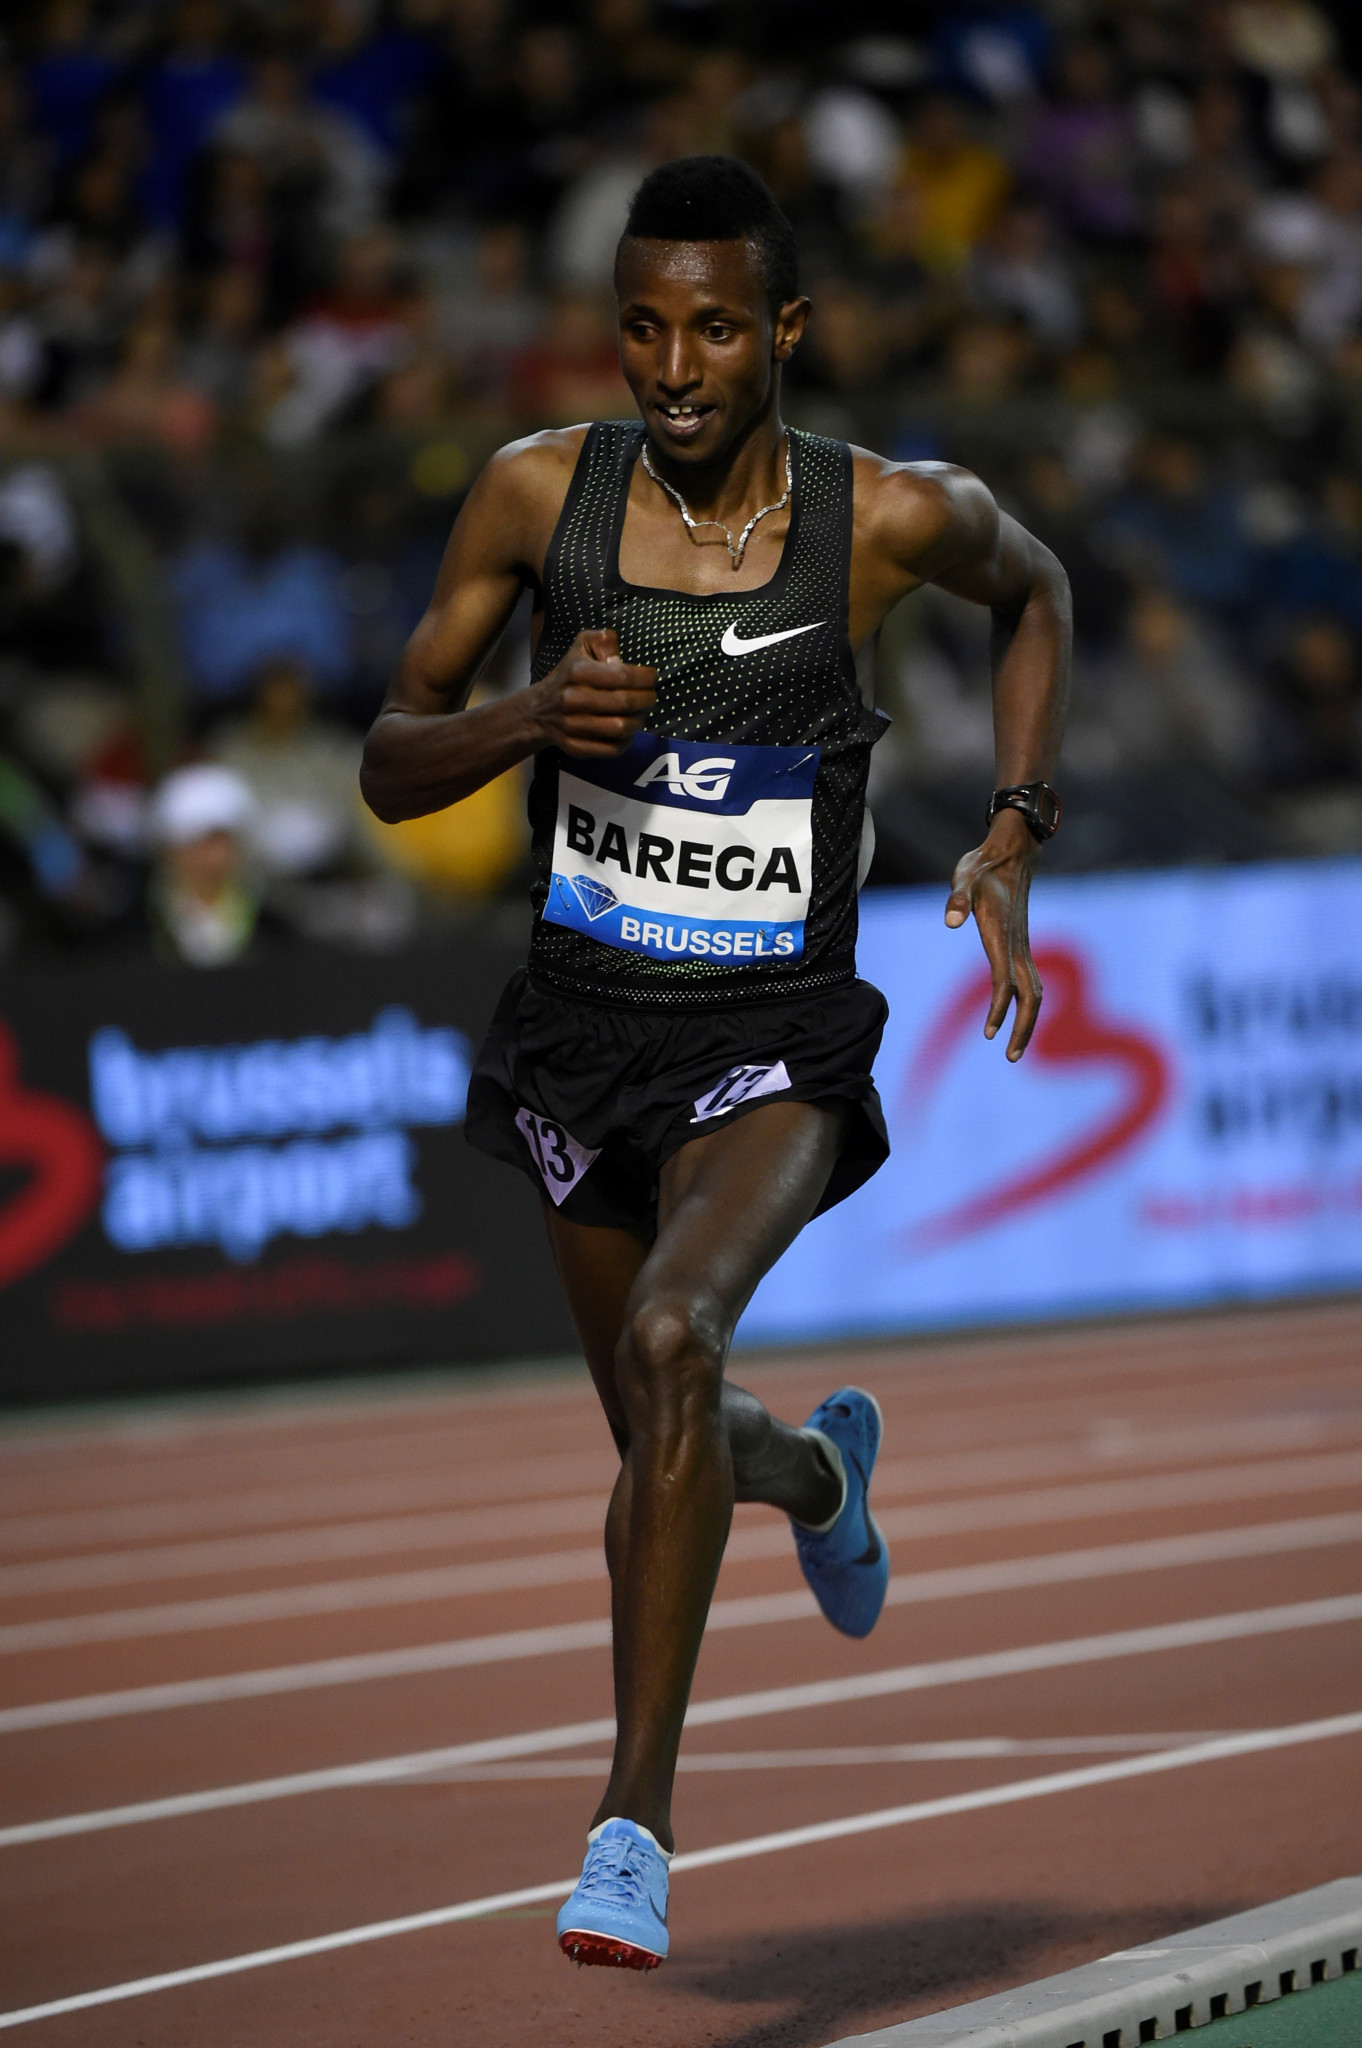 Selemon Barega will compete tomorrow having not raced since the IAAF Diamond League Final in August ©Getty Images